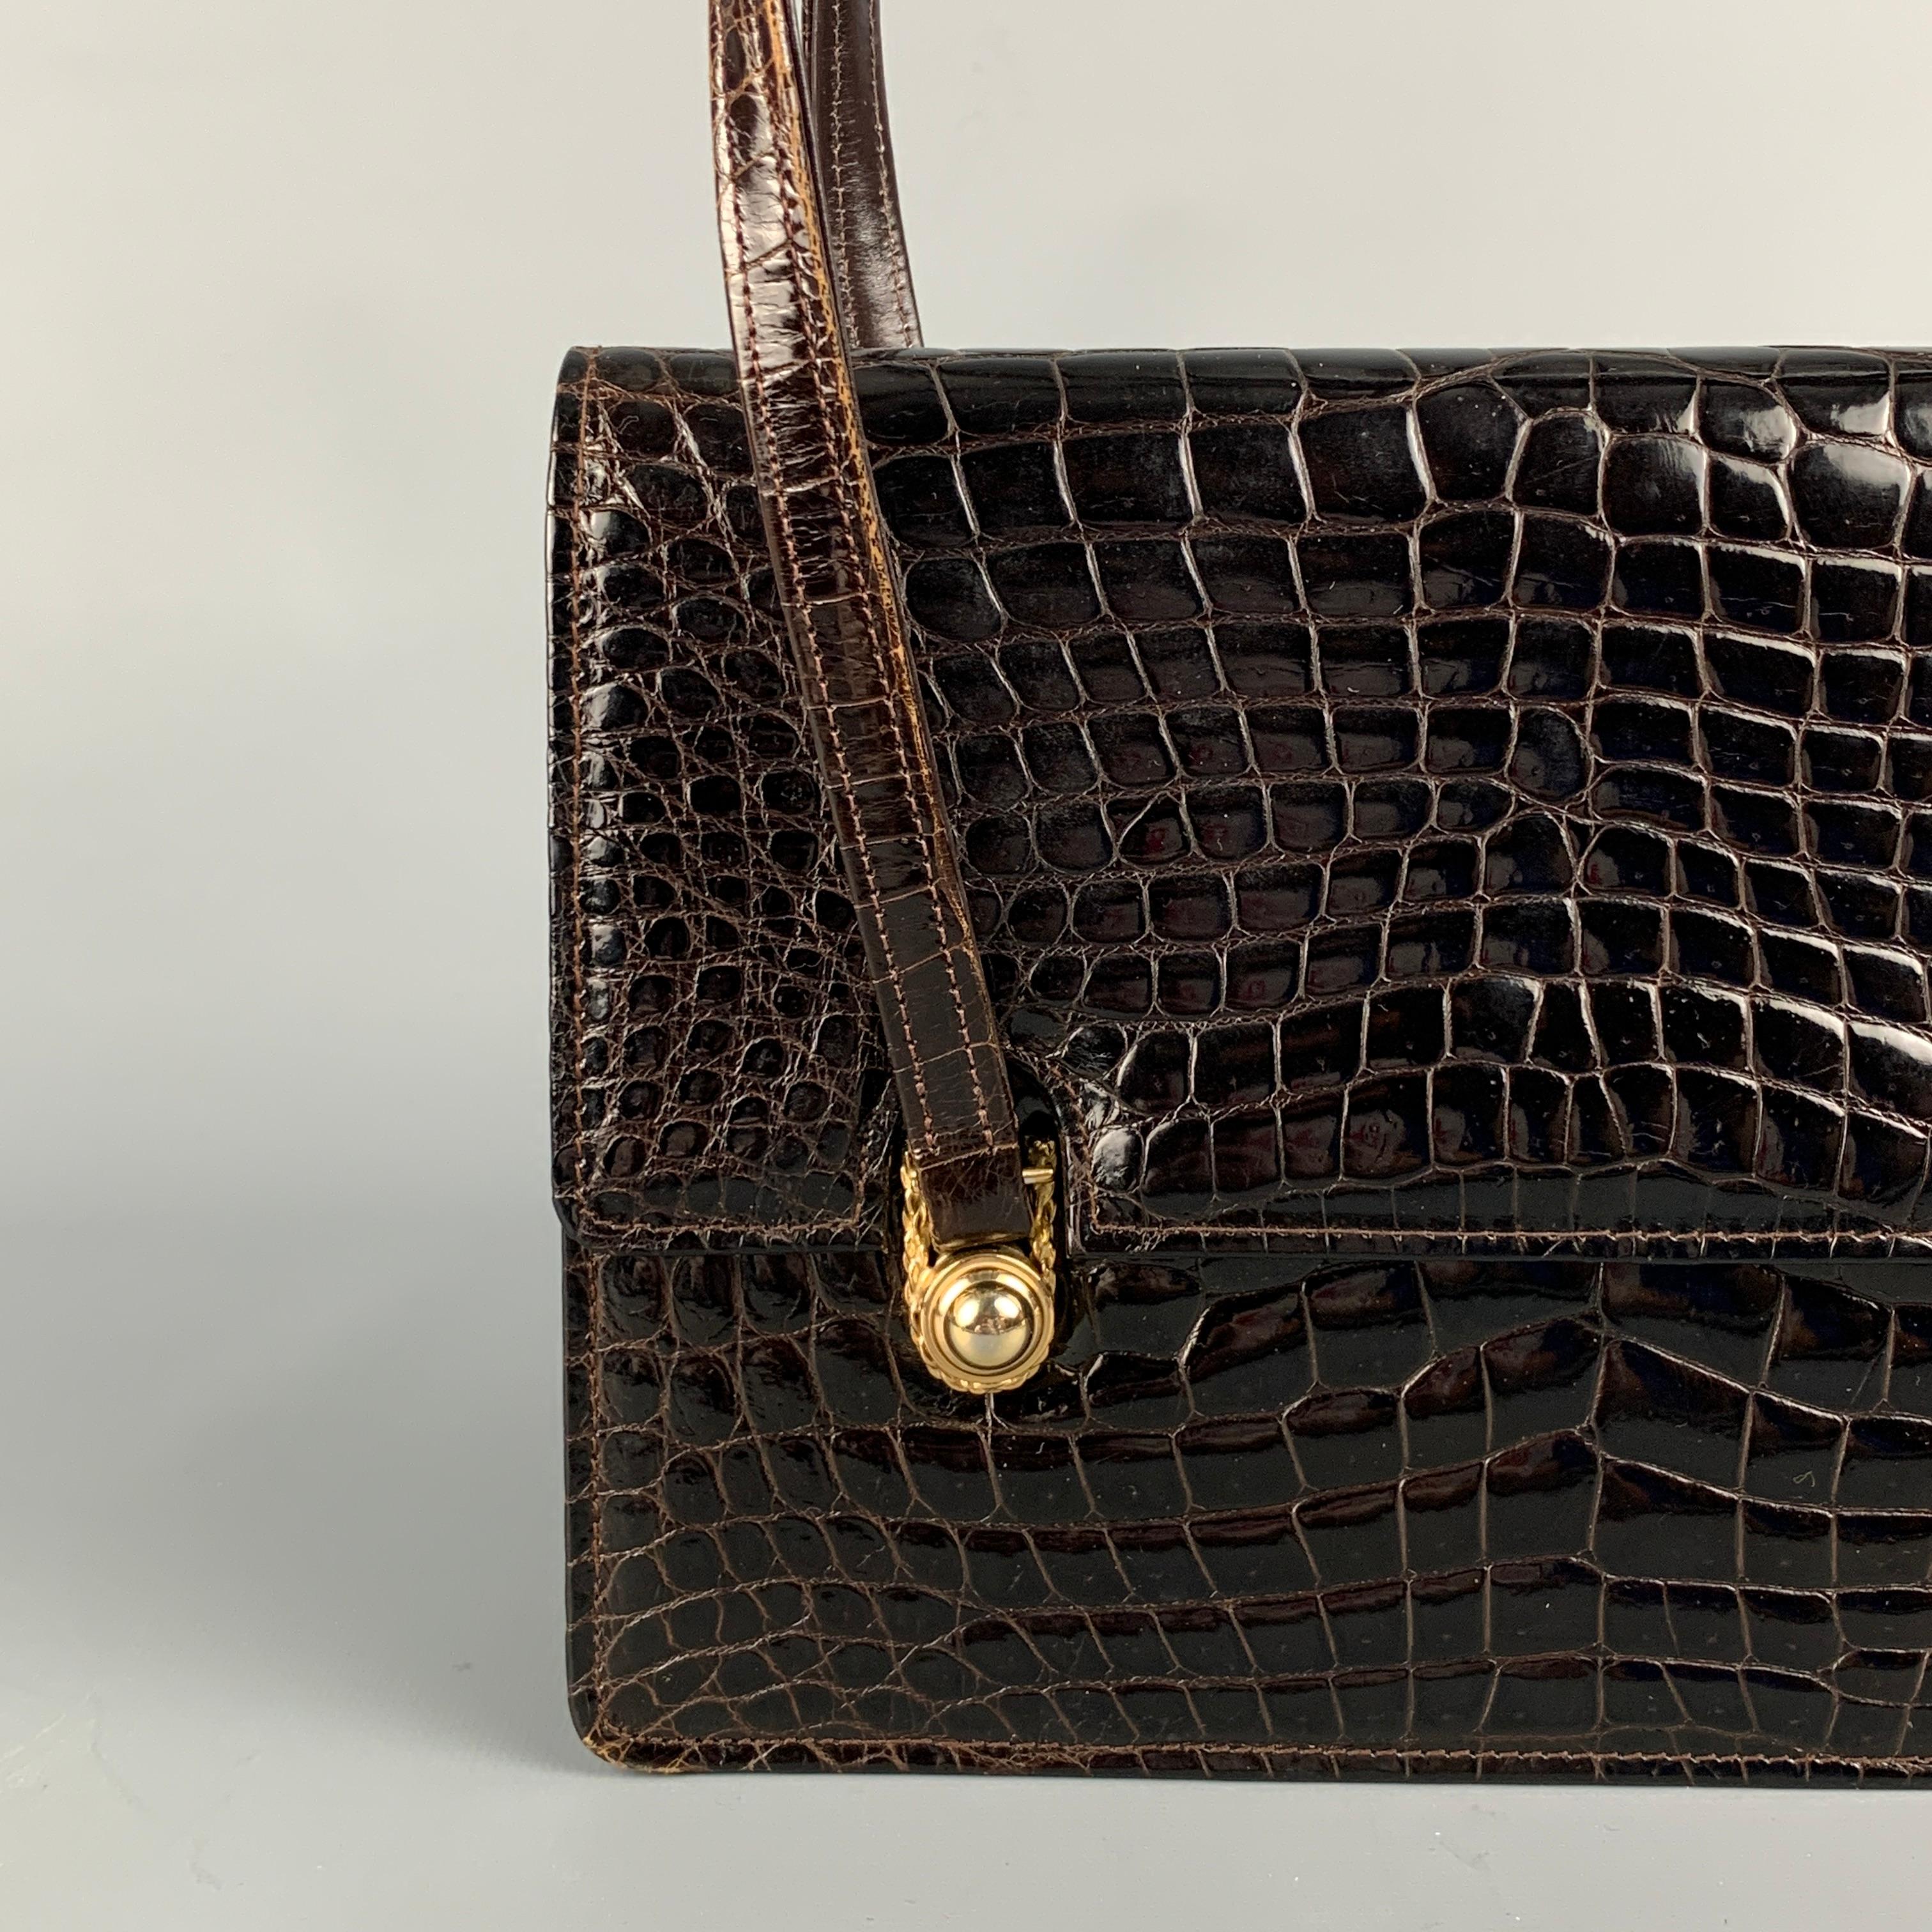 Vintage SACHA handbag comes in a brown textured alligator leather featuring double top handles, gold tone hardware, inner compartments, and a snap button closure. 

Very Good Pre-Owned Condition.

Measurements:

Length: 9 in.
Width: 3 in.
Height: